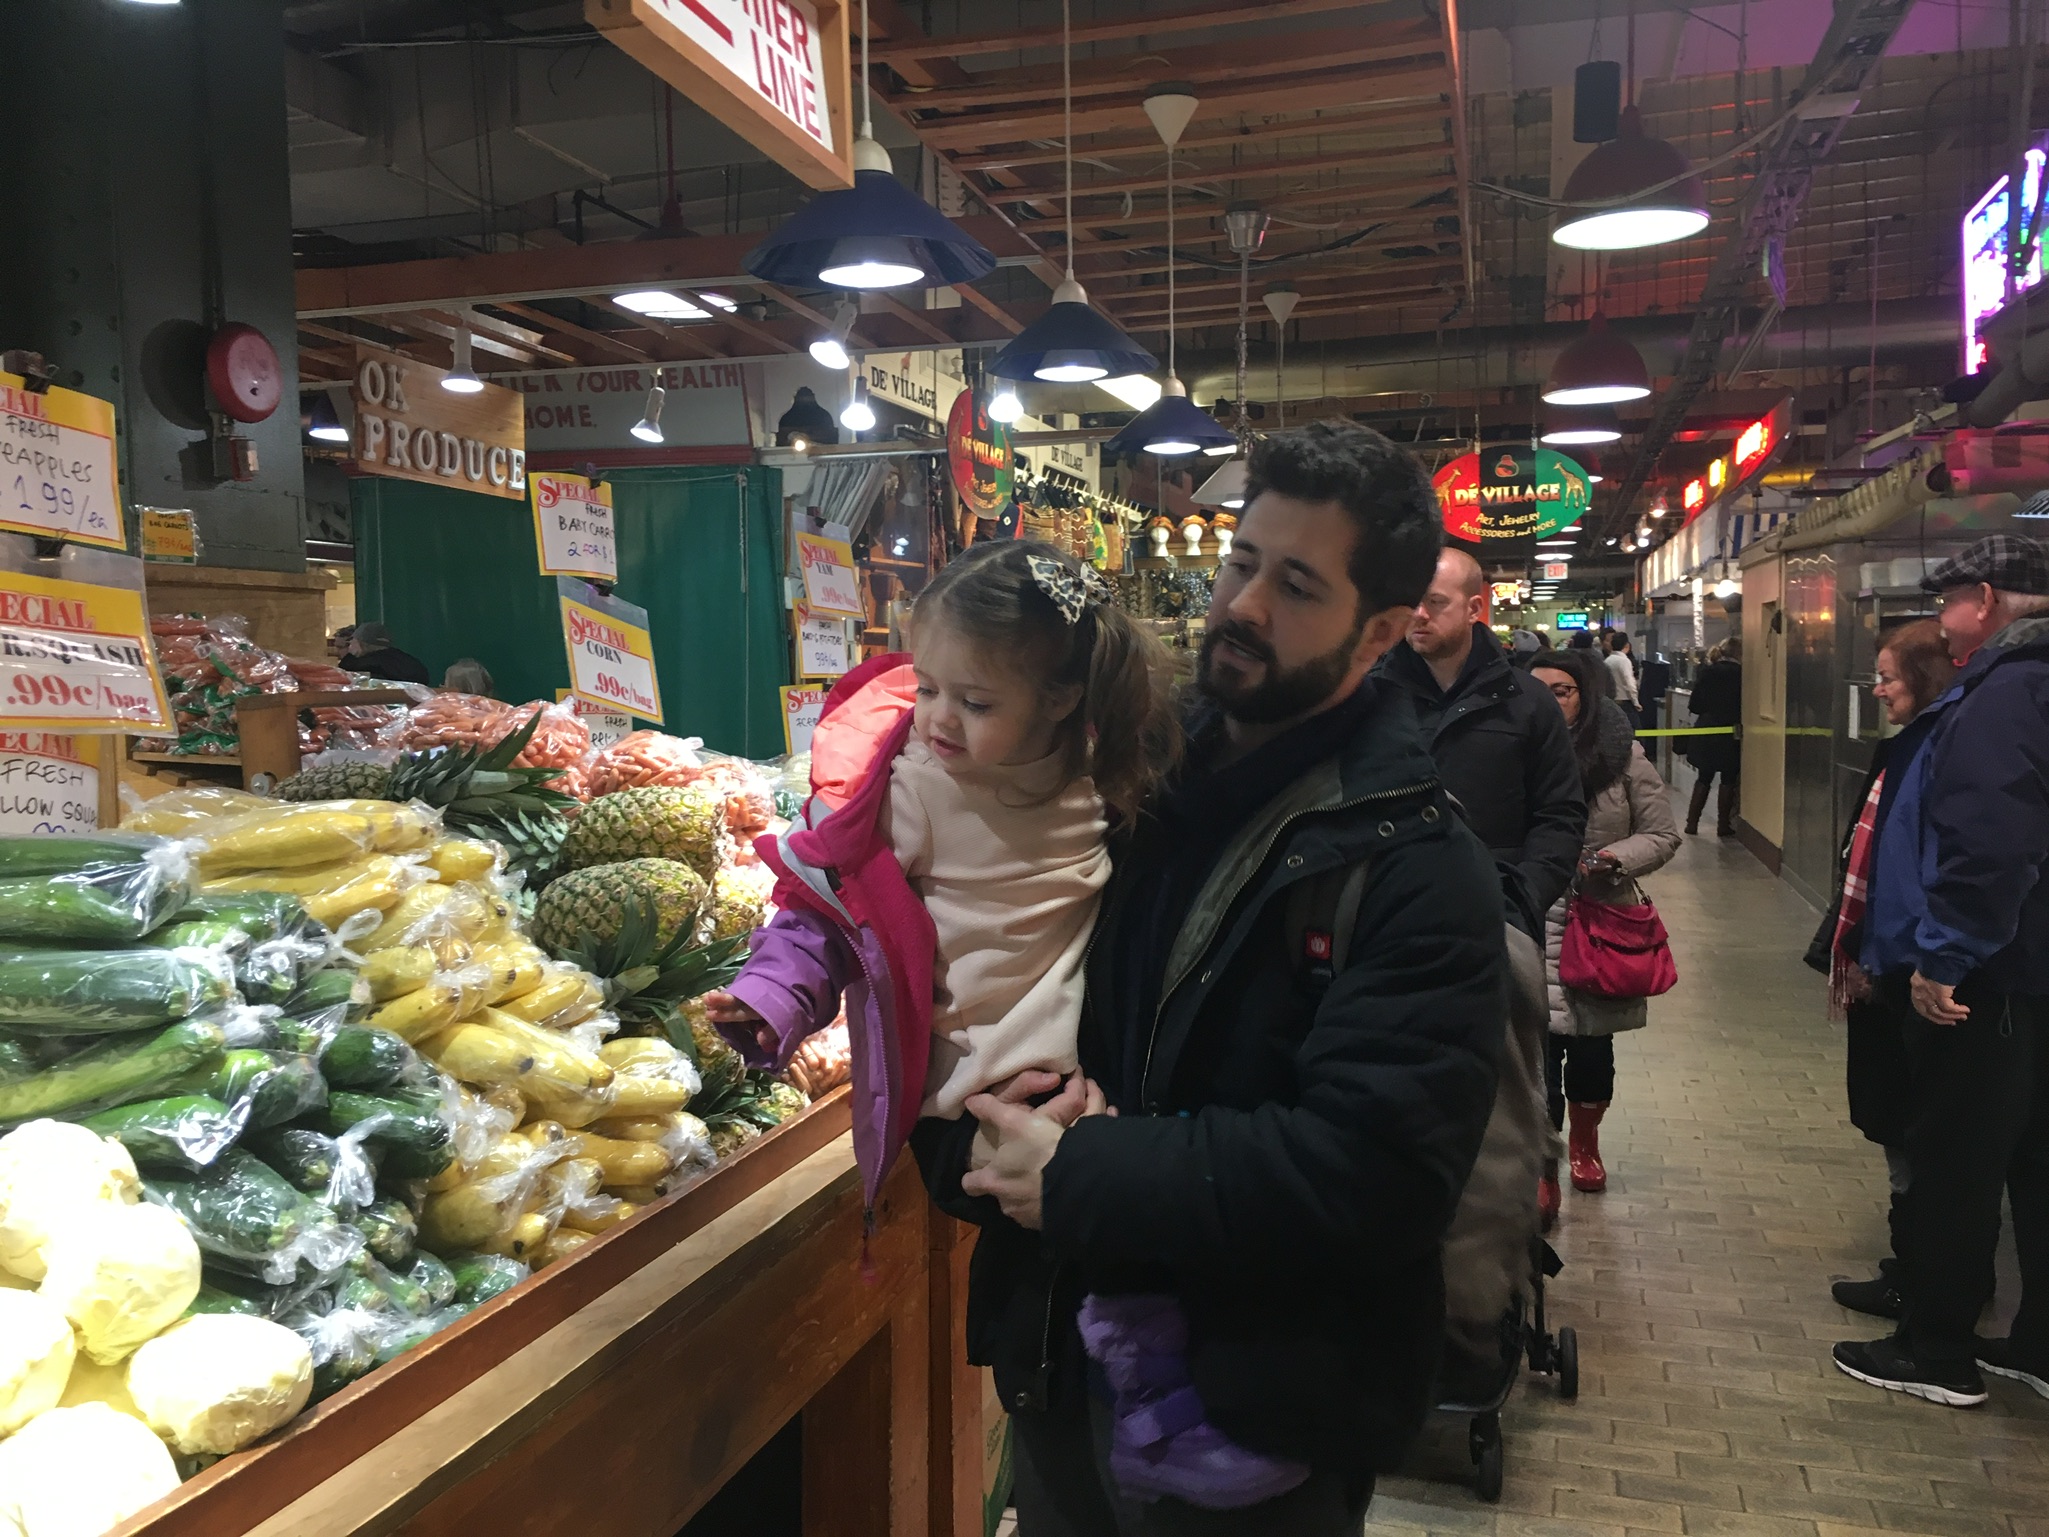  At Reading Market Terminal getting food for a fresh homemade dinner. 